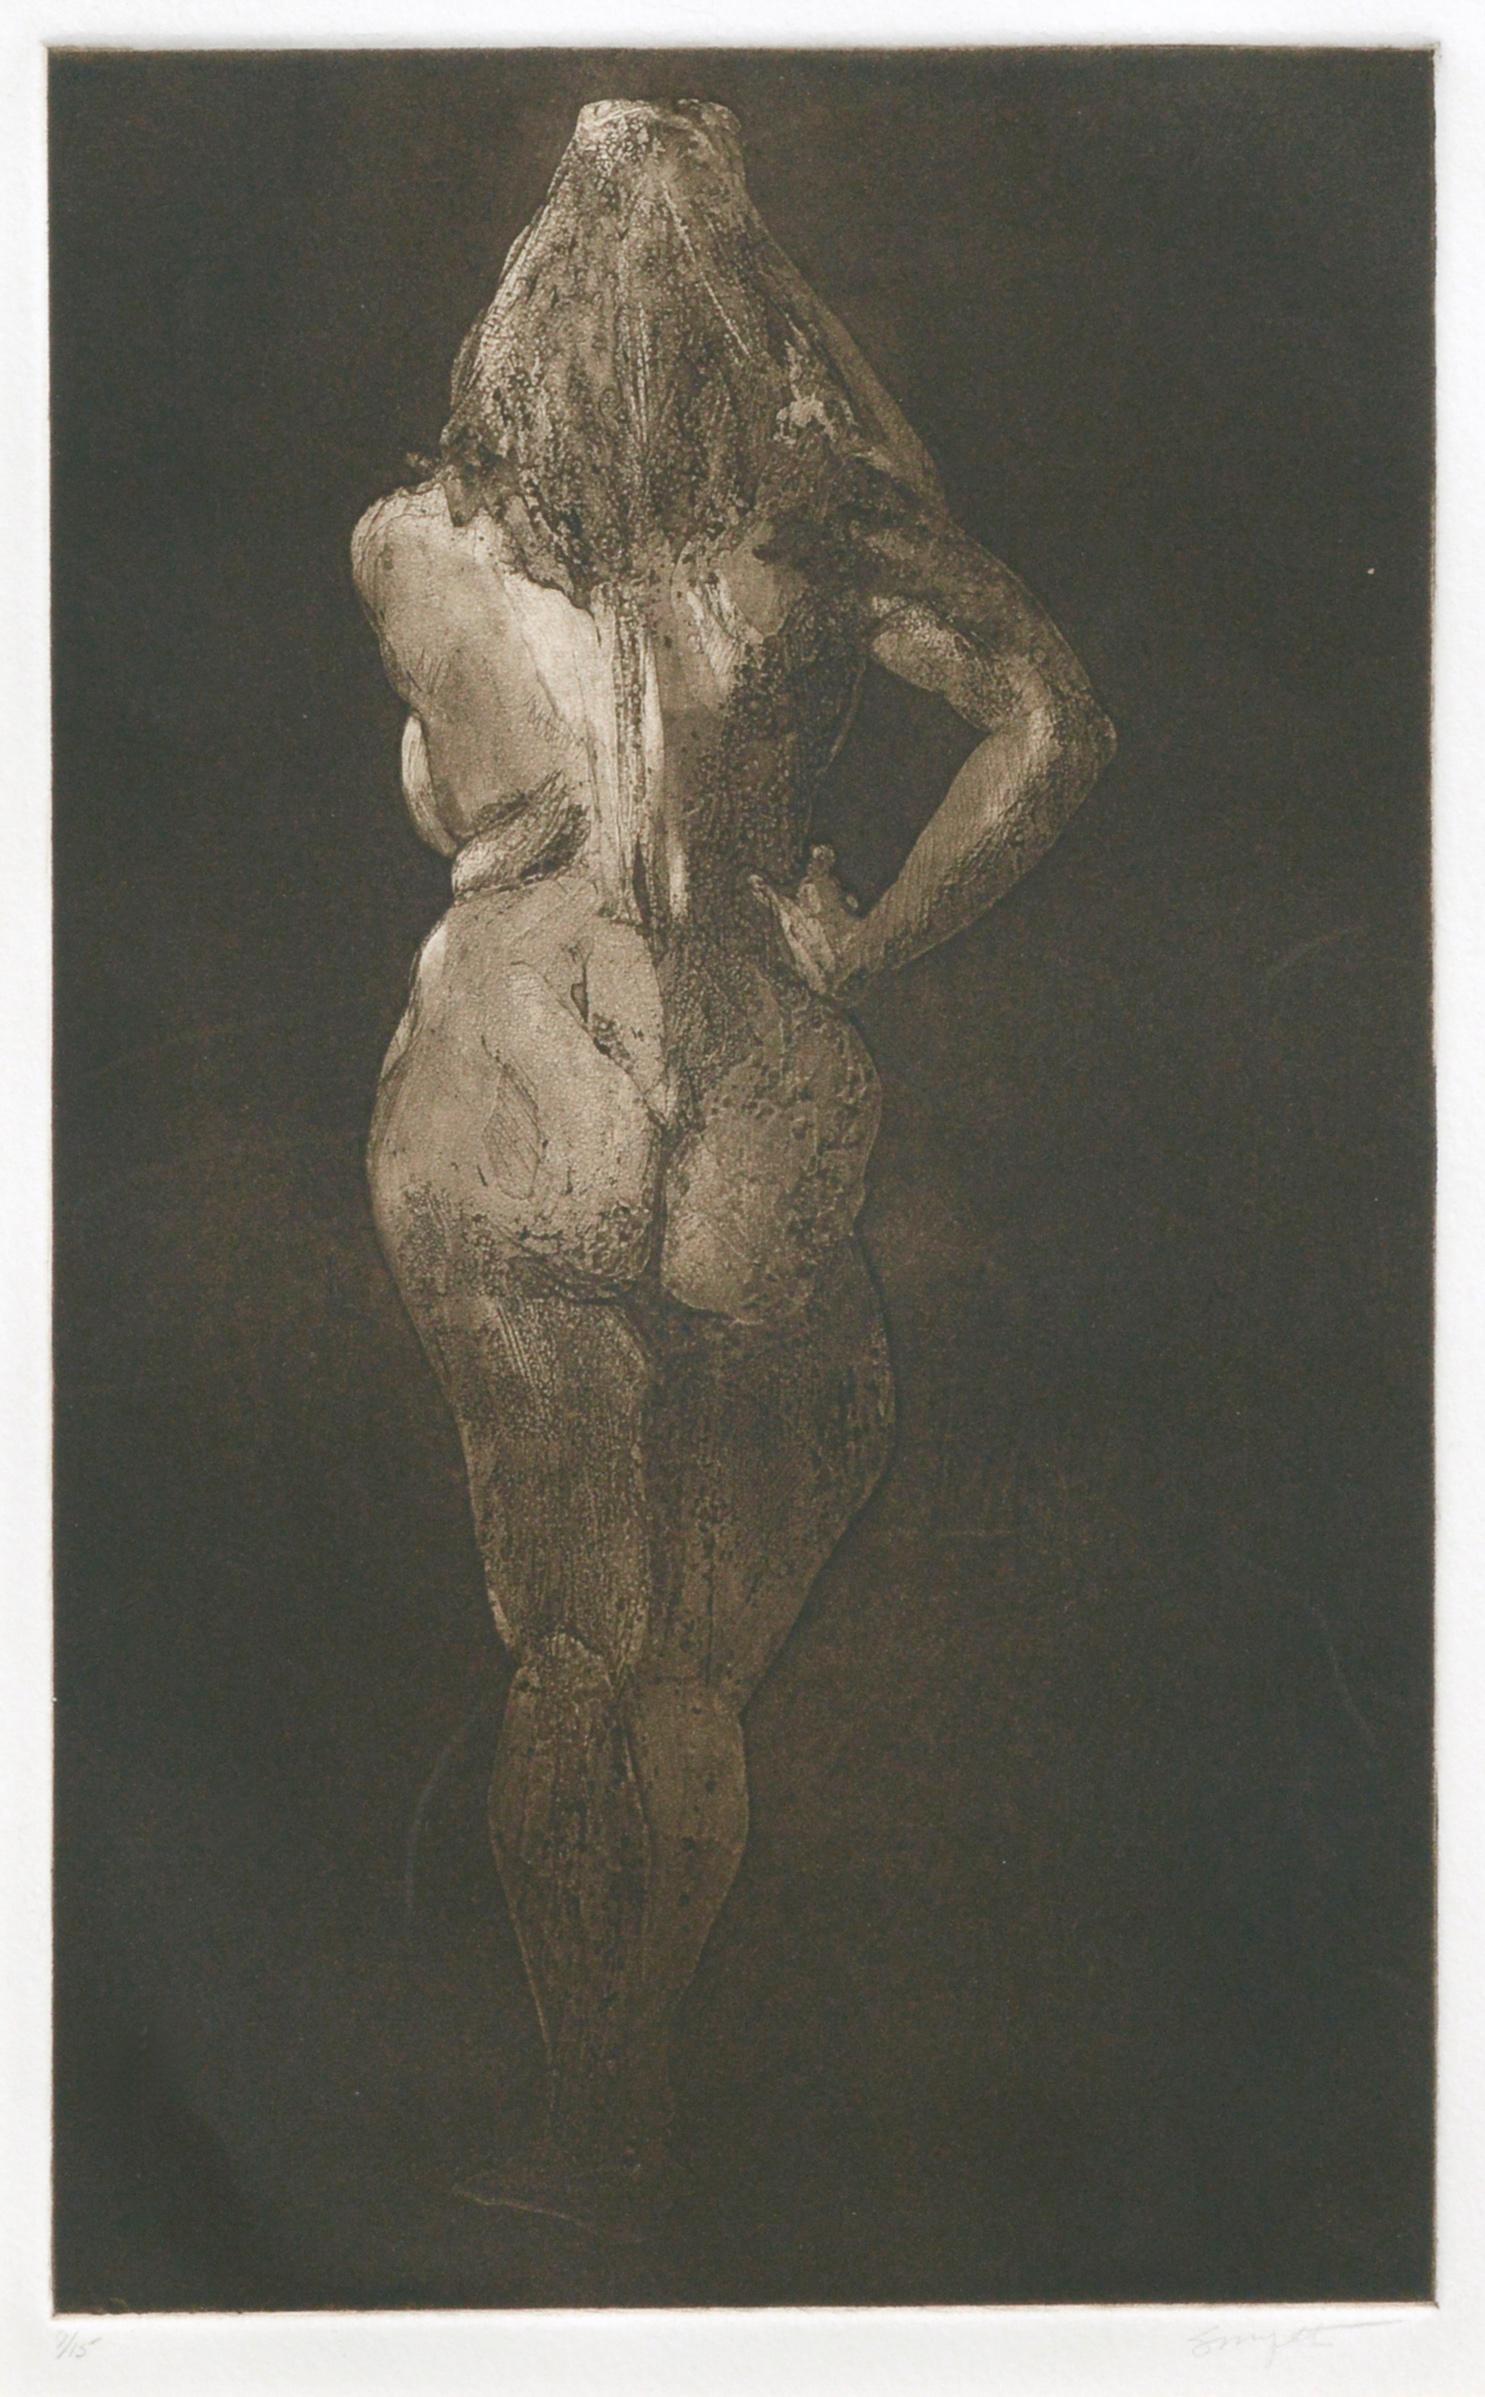 Nude Figure Posterior View, Figurative Drypoint Etching - Print by Jim Smyth